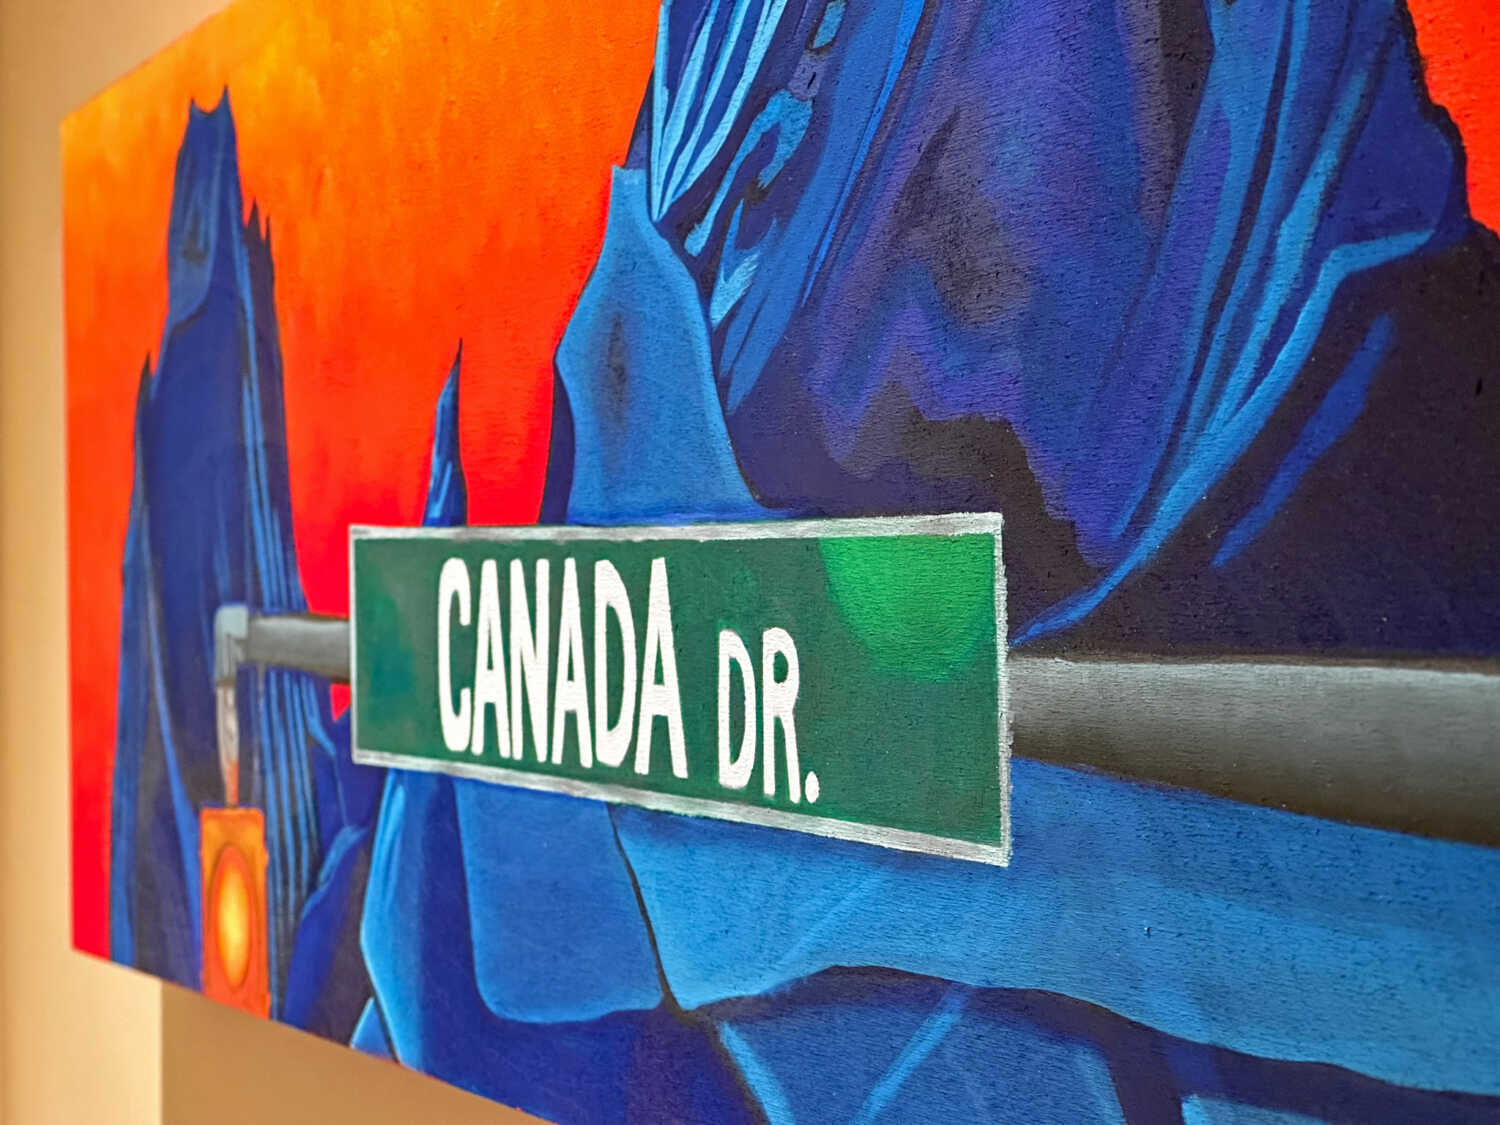 Canada Drive painting